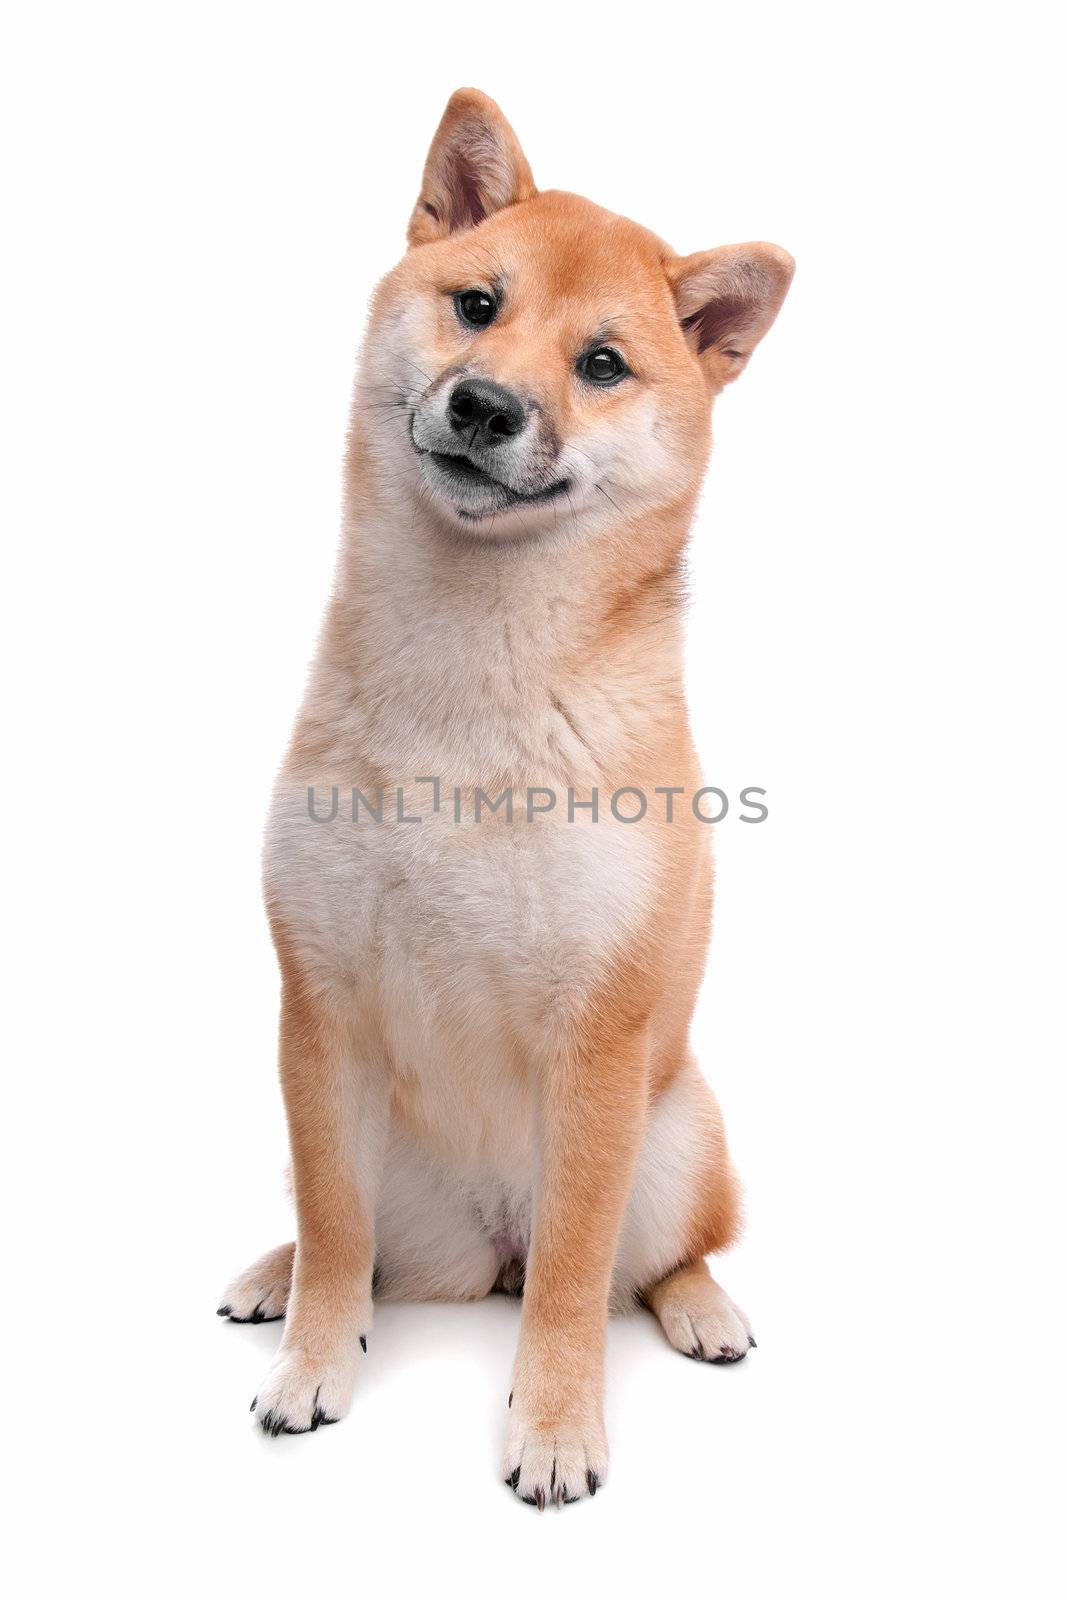 Shiba Inu dog in front of a white background by eriklam